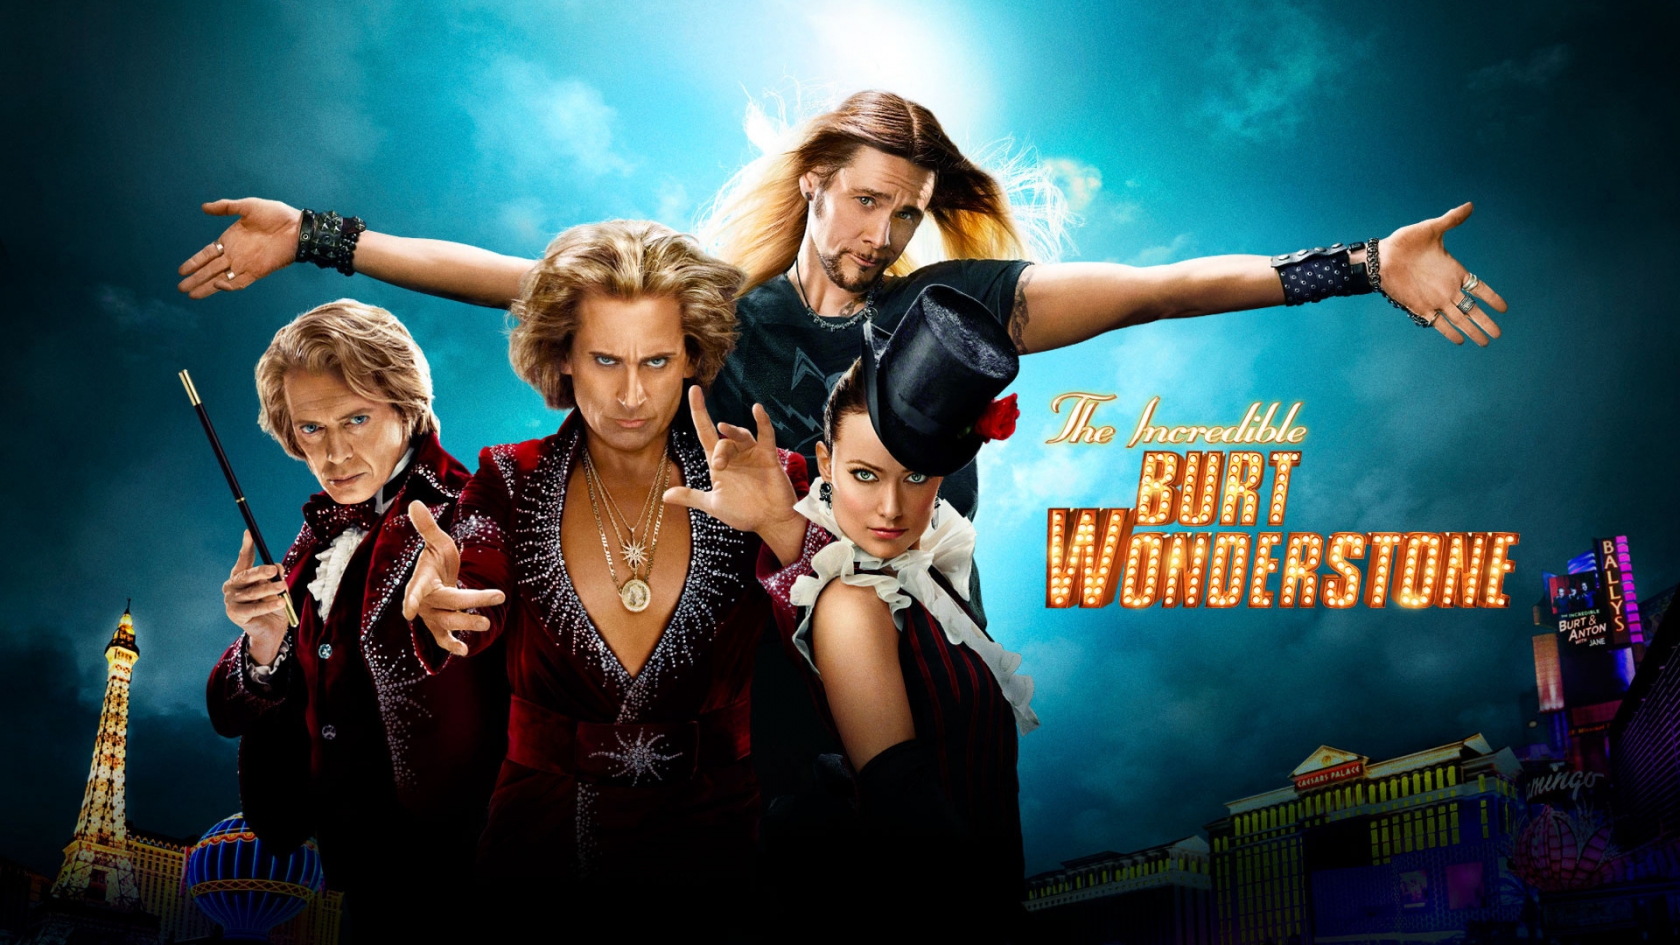 2013 The Incredible Burt Wonderstone Poster for 1680 x 945 HDTV resolution